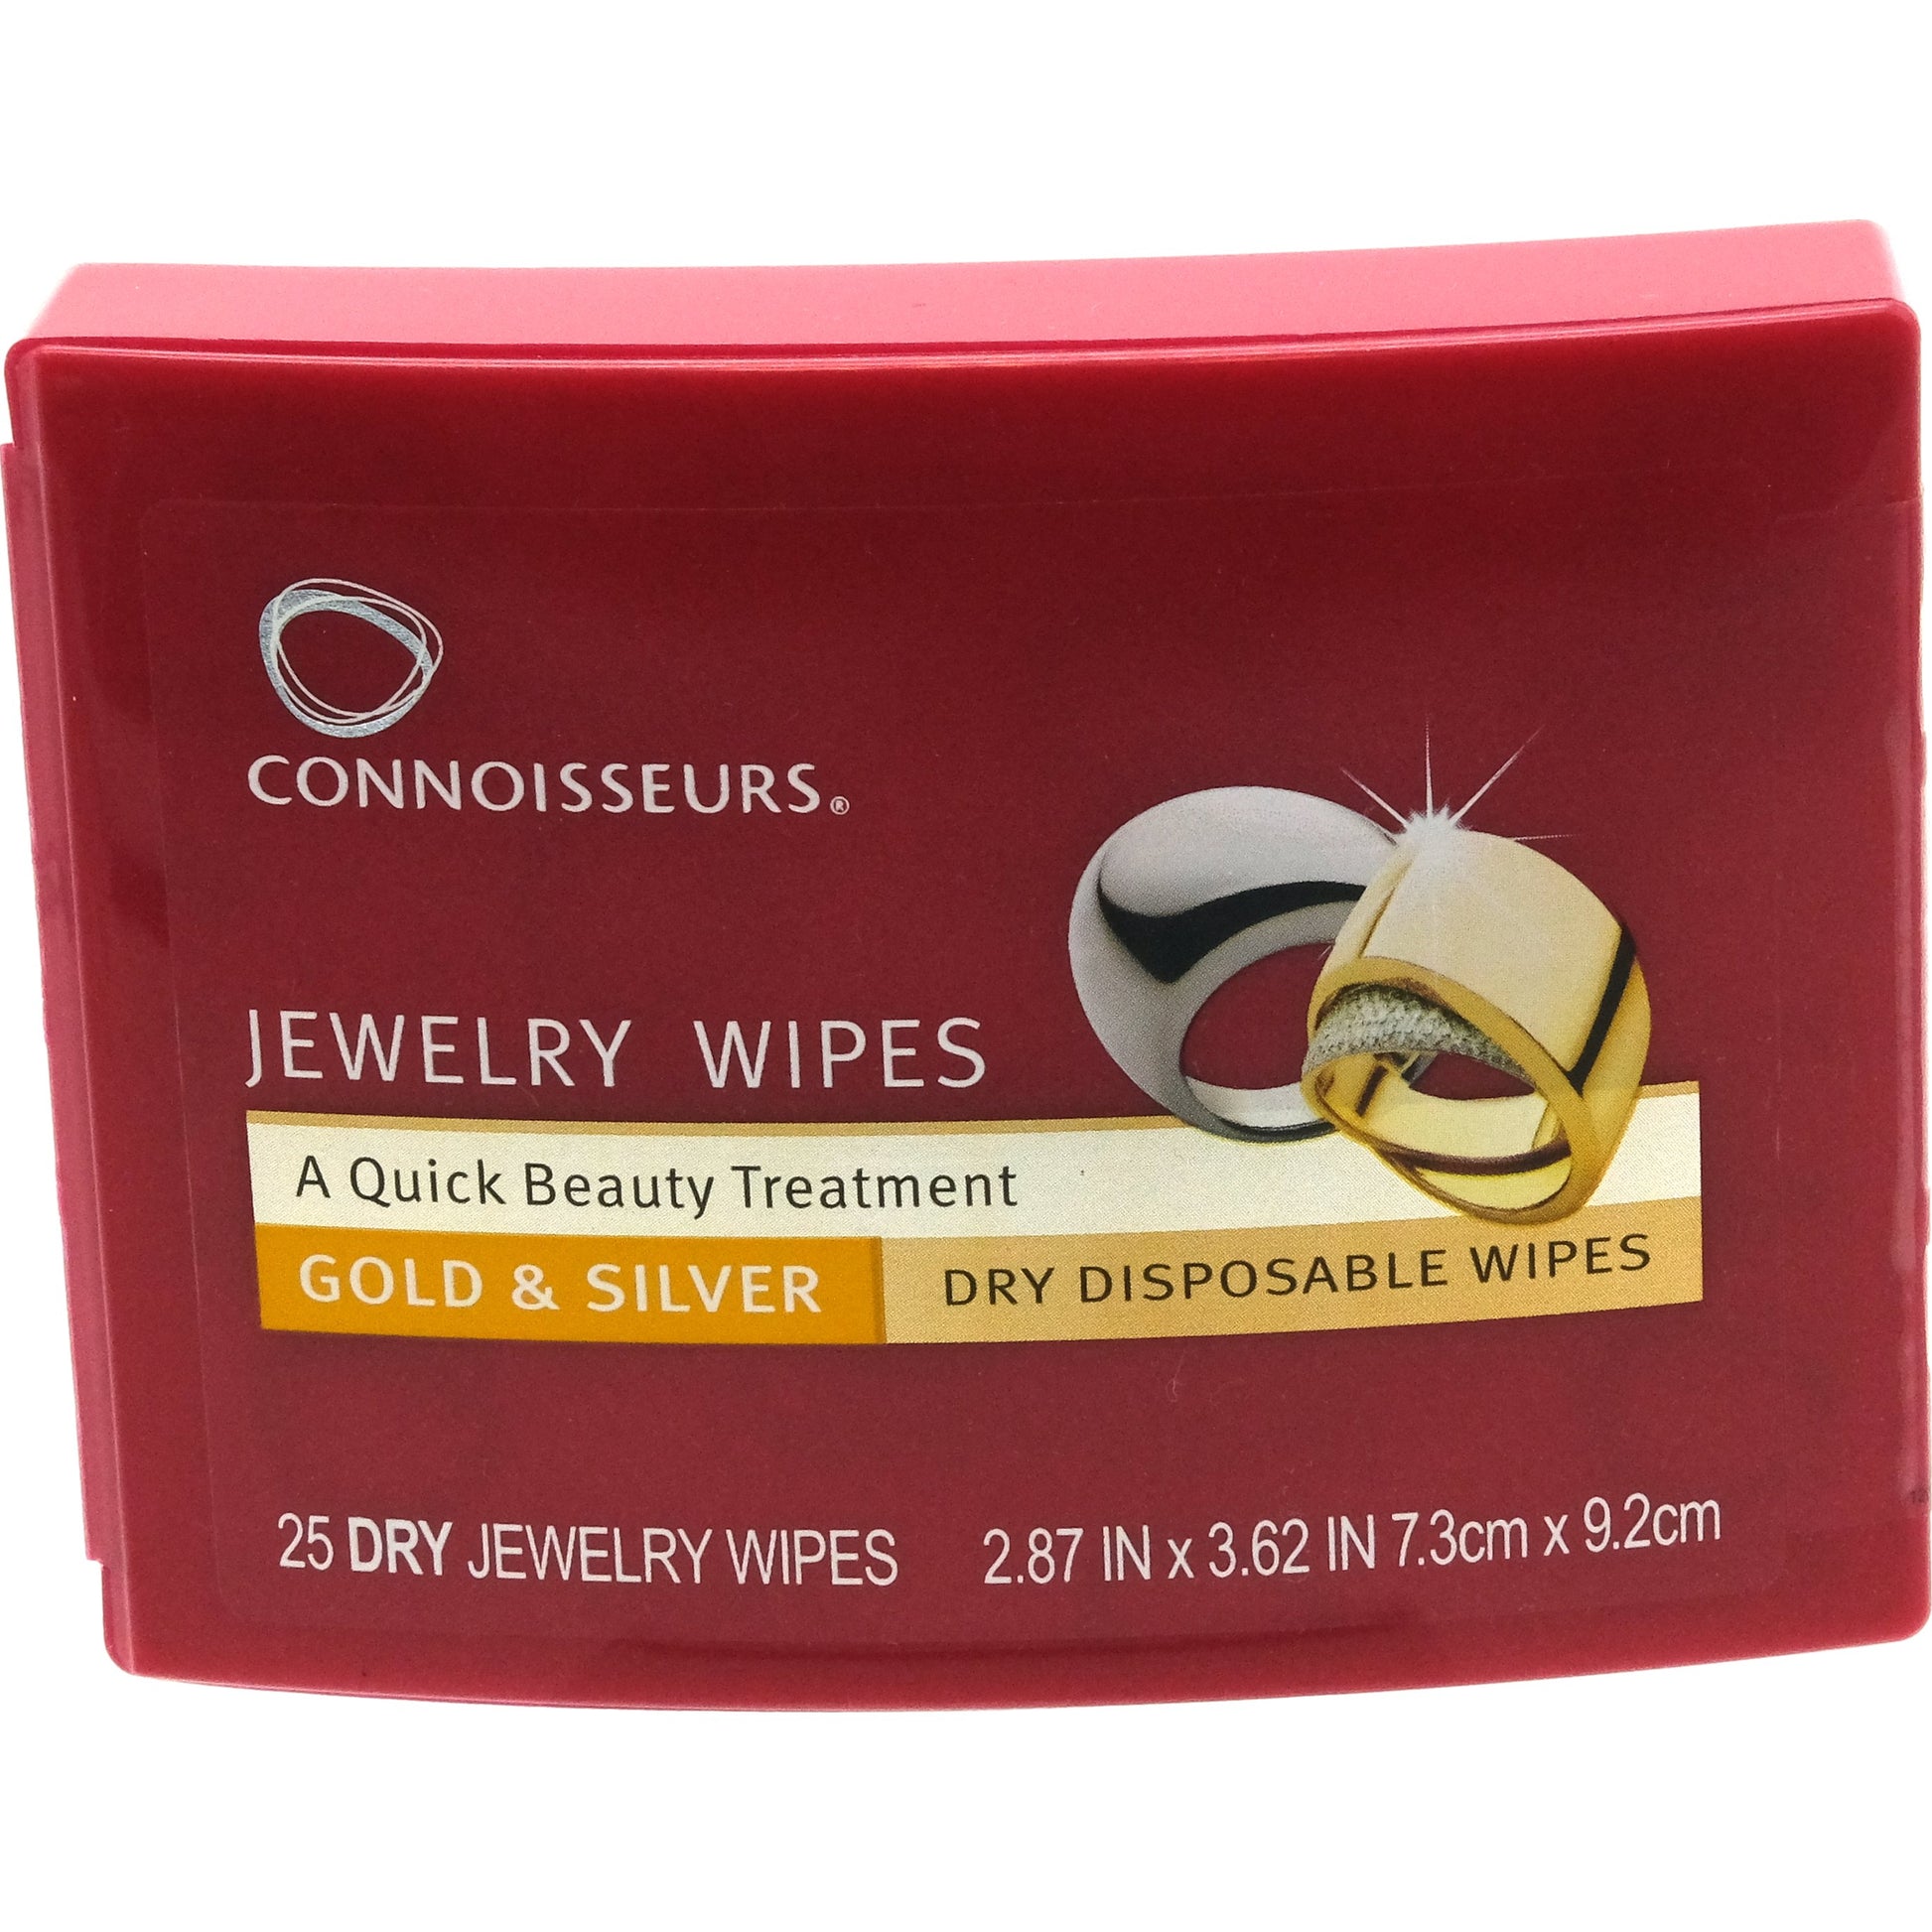 Connoisseurs Jewelry Wipes 600 Wipes – FindingKing